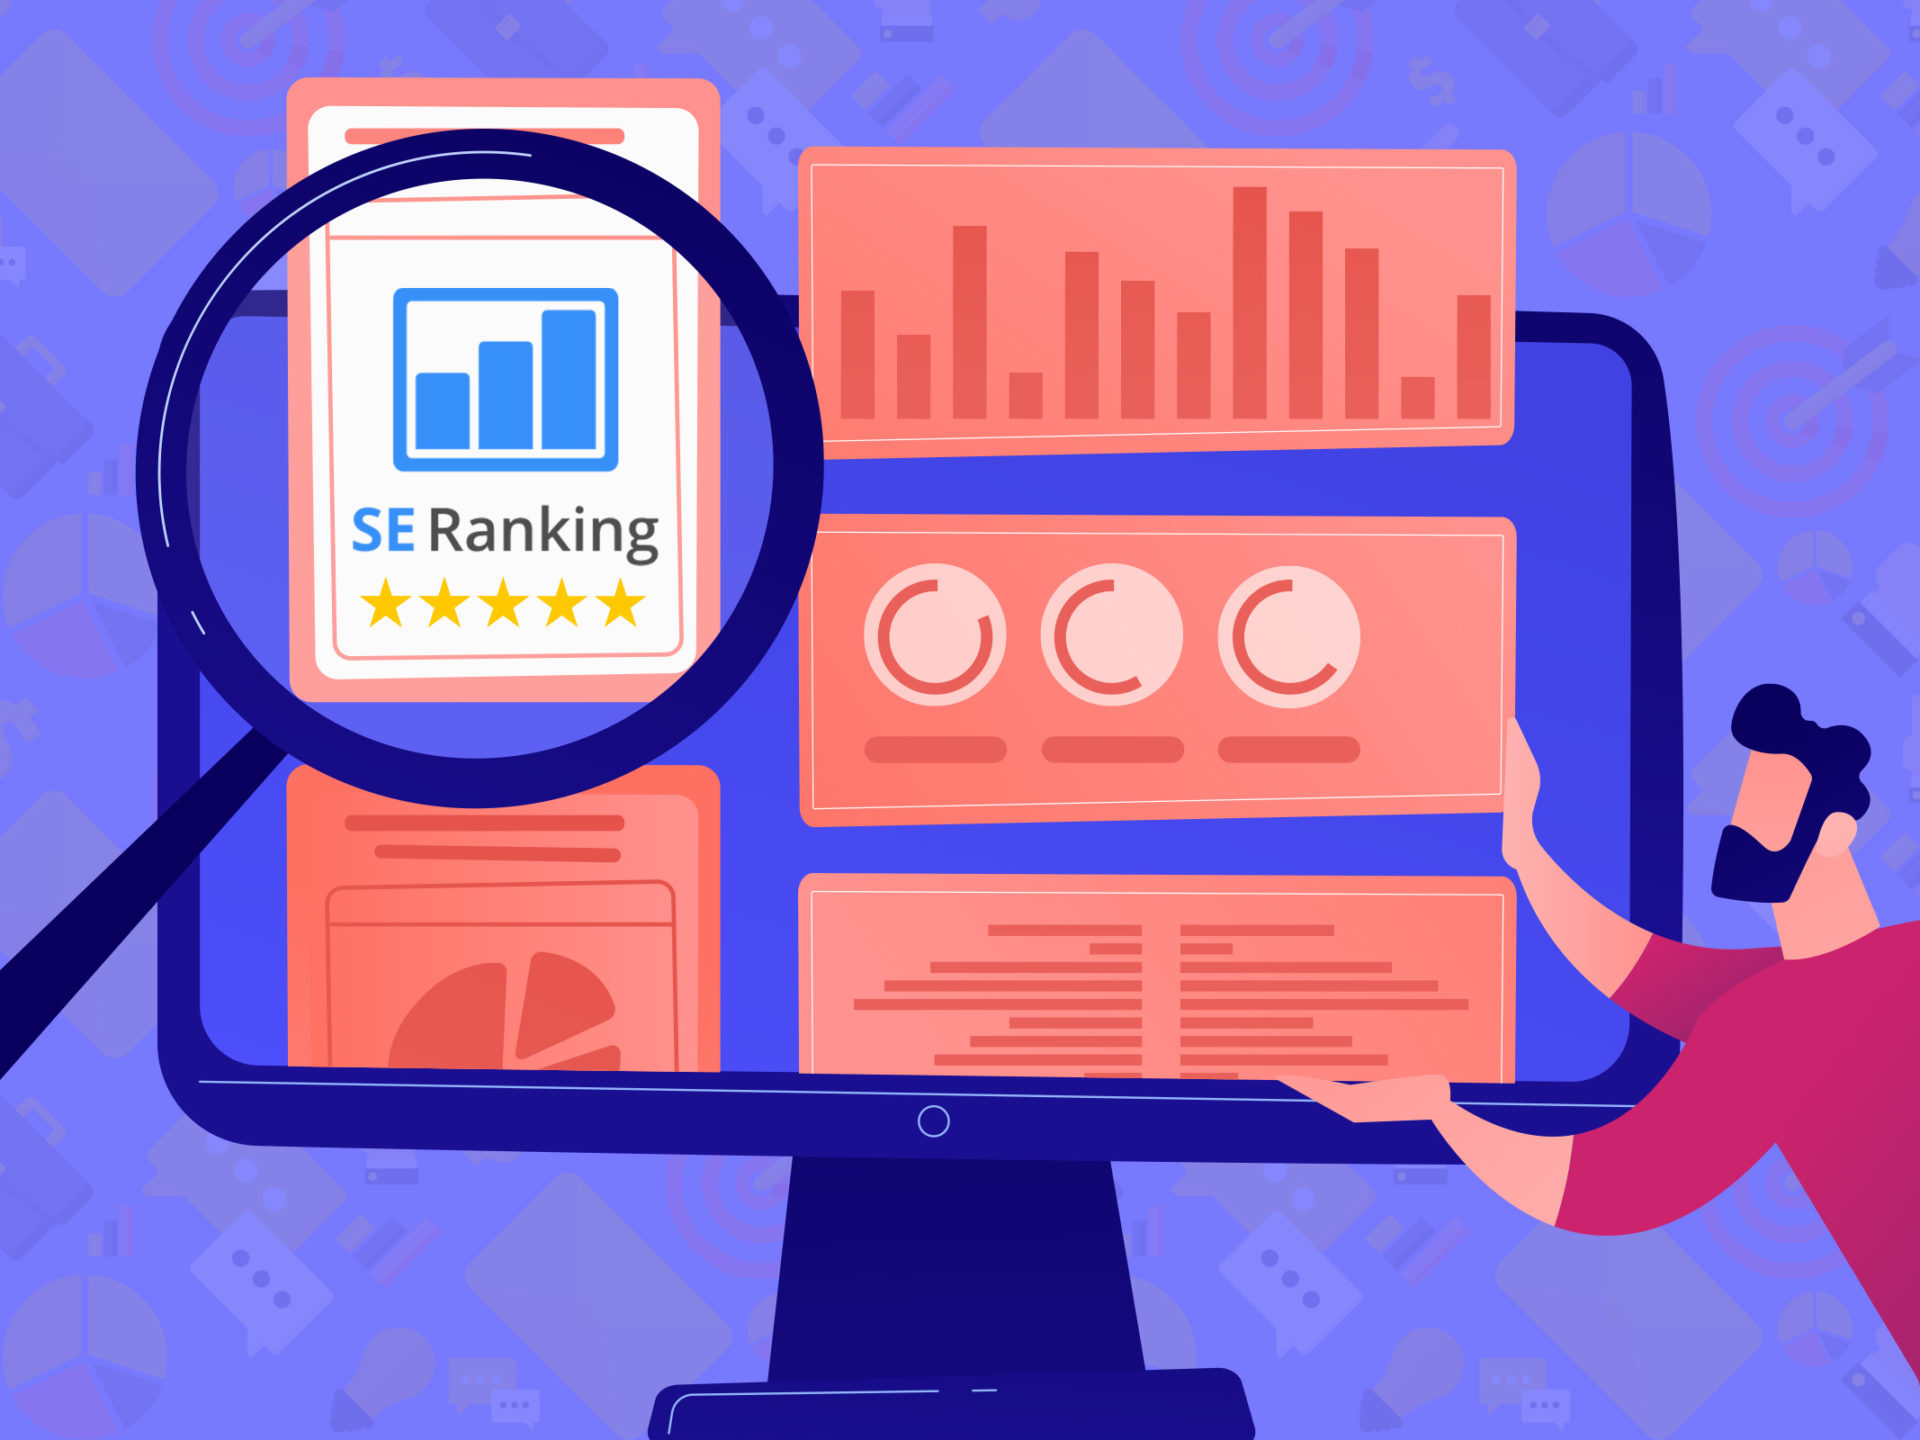 An In-Depth Look at SE Ranking’s Content Marketing Platform